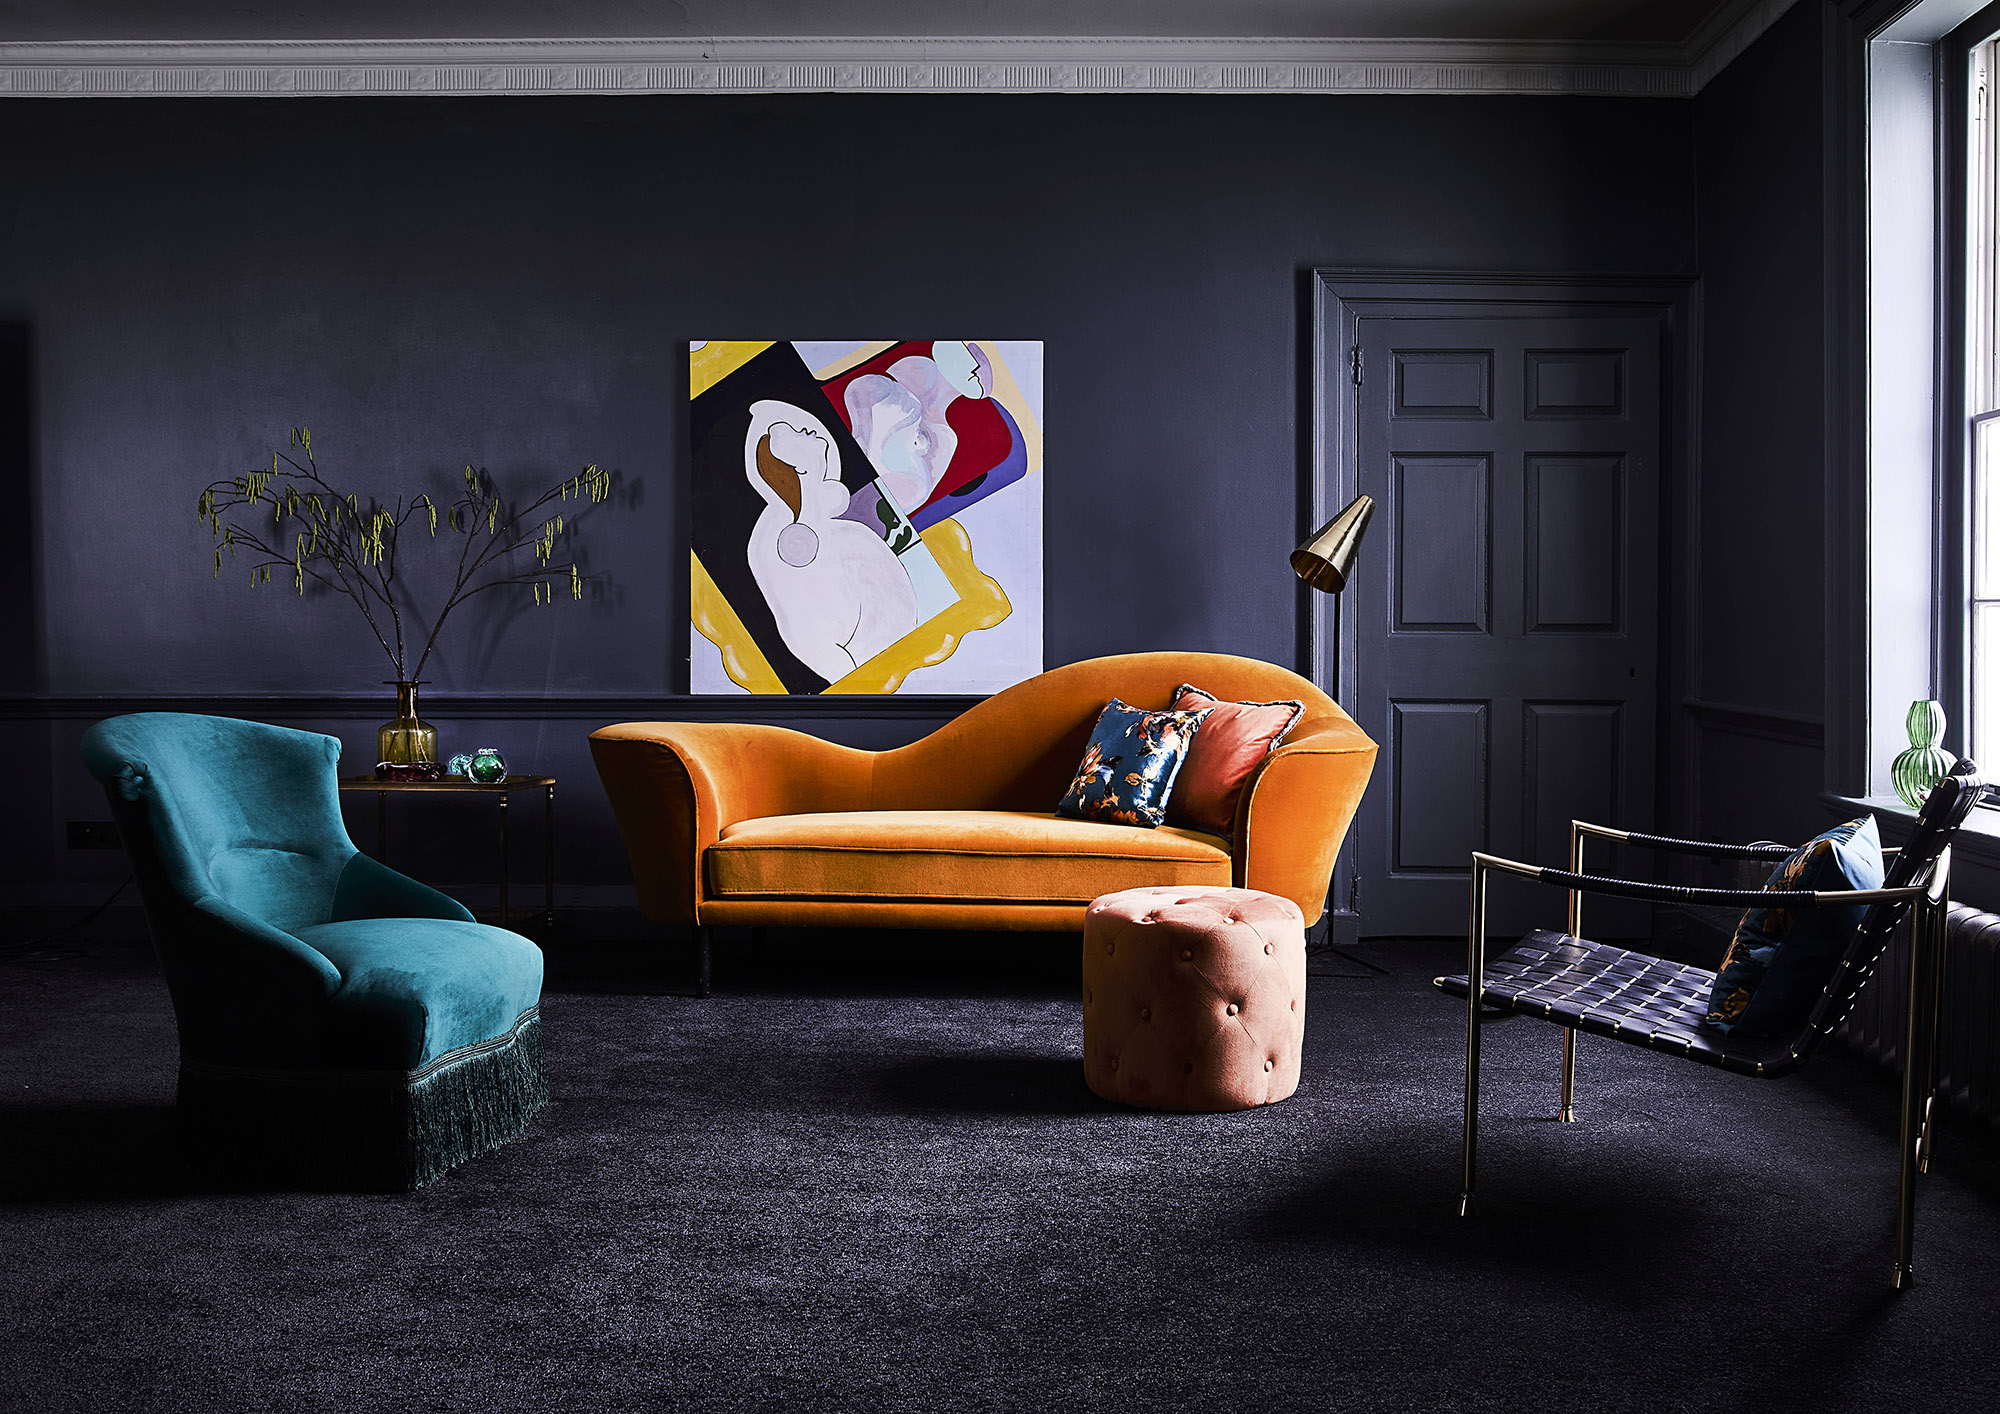 Black living room ideas: 10 stylish ways to create a dramatic space